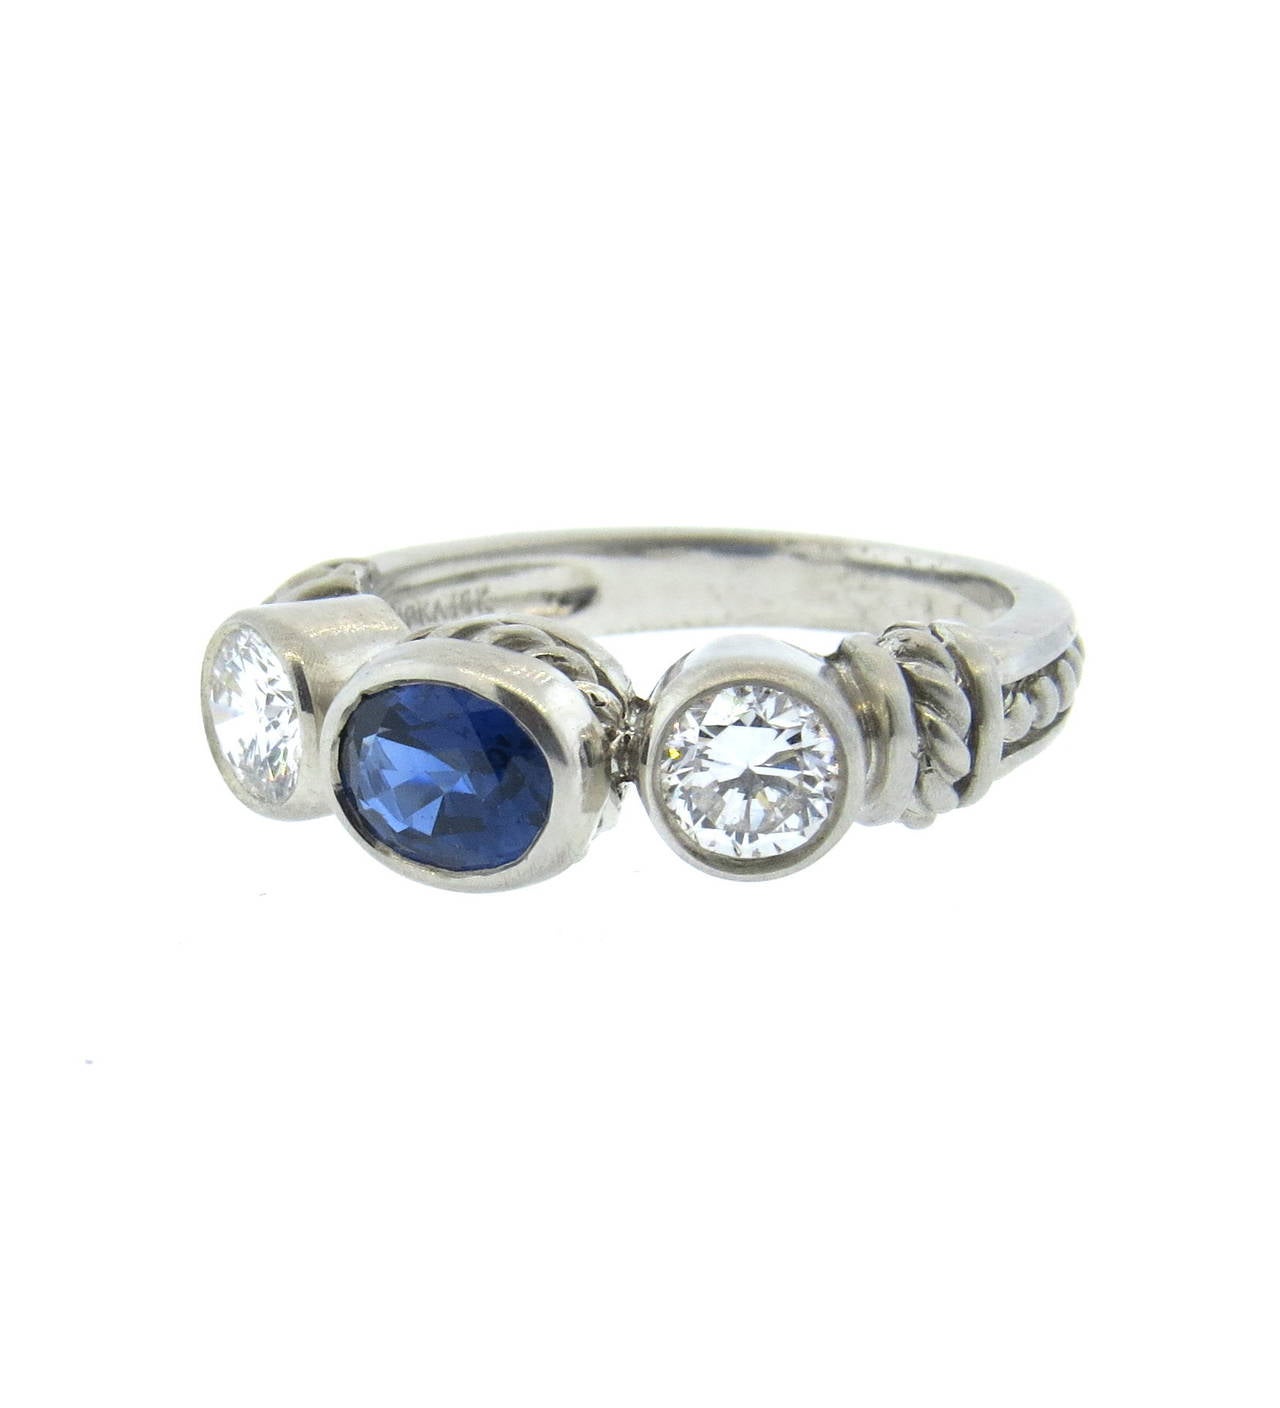 18k white gold ring by Judith Ripka, featuring oval sapphire, set with two diamonds on each side. Ring size is 6 1/2, ring top is 7mm x 20mm. Marked Judith Ripka and 18k. weight - 6.8 grams